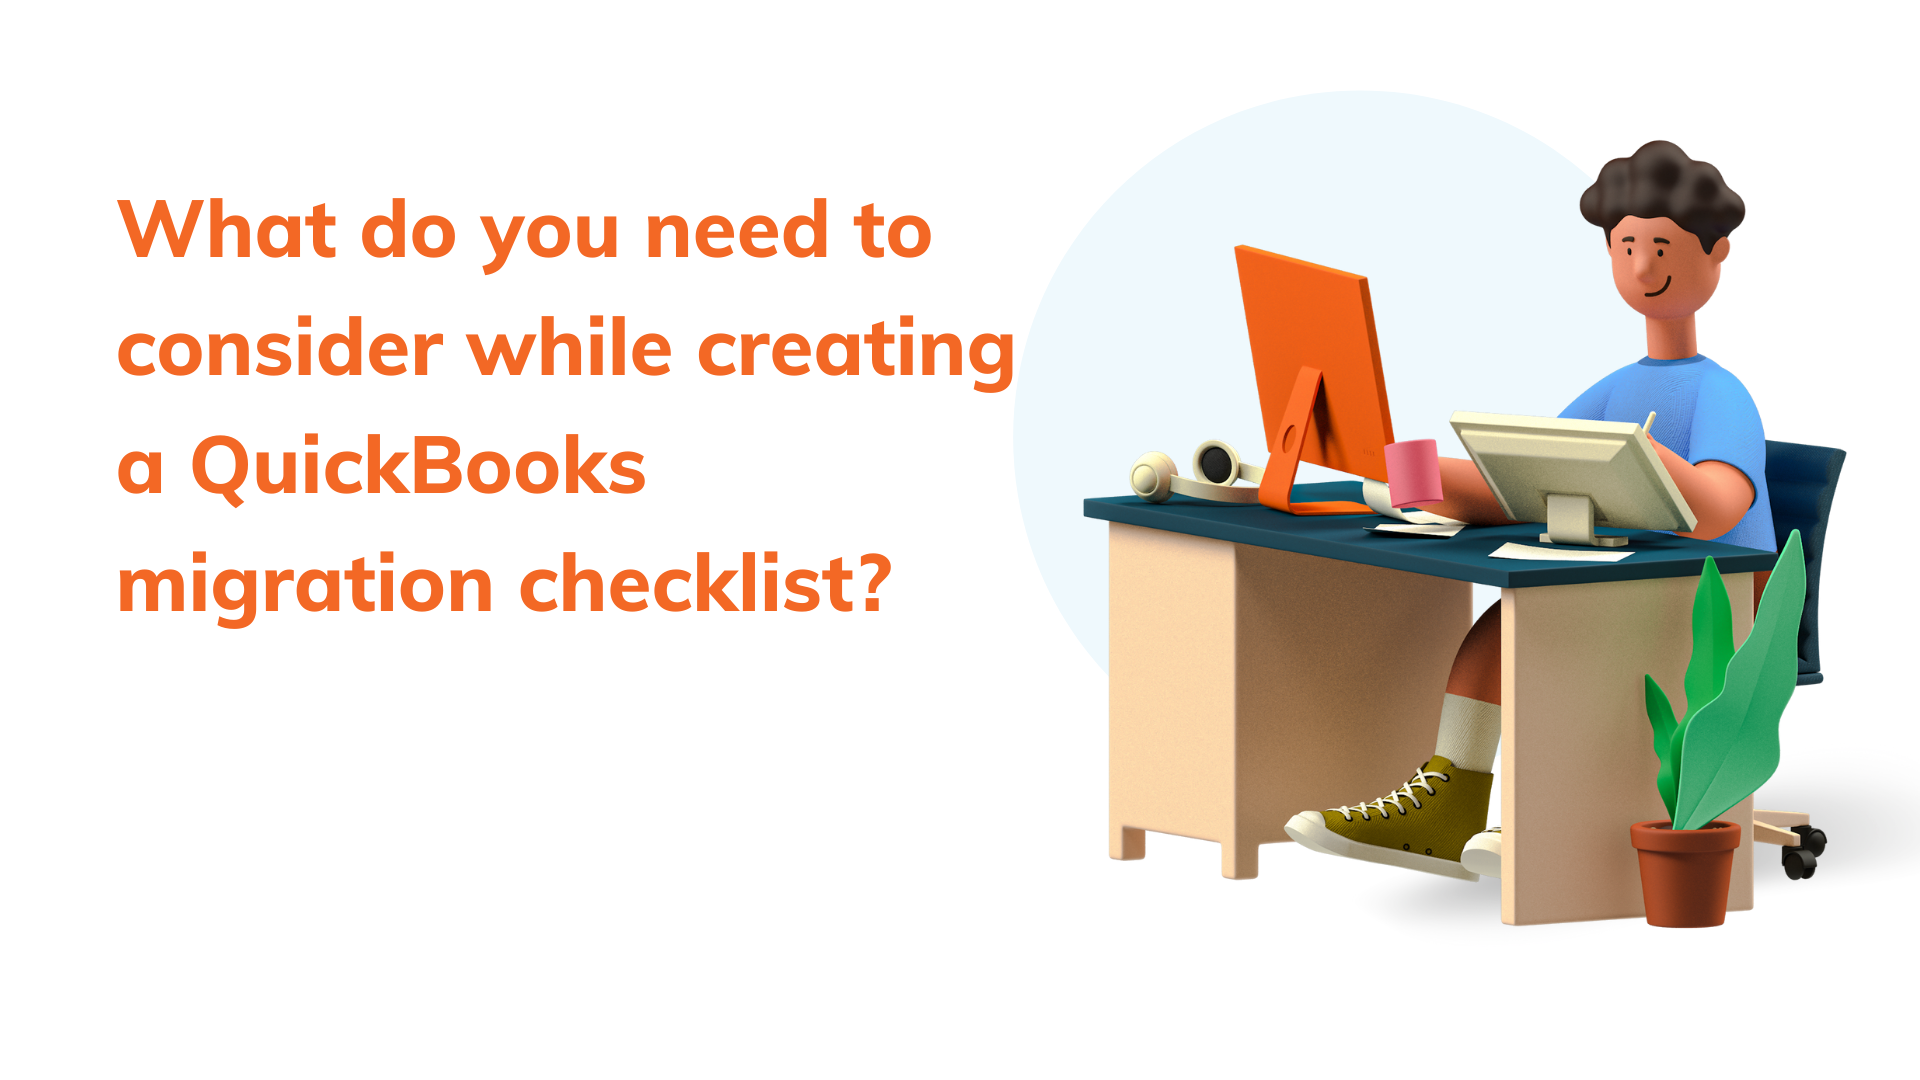 What do you need to consider while creating a QuickBooks migration checklist?